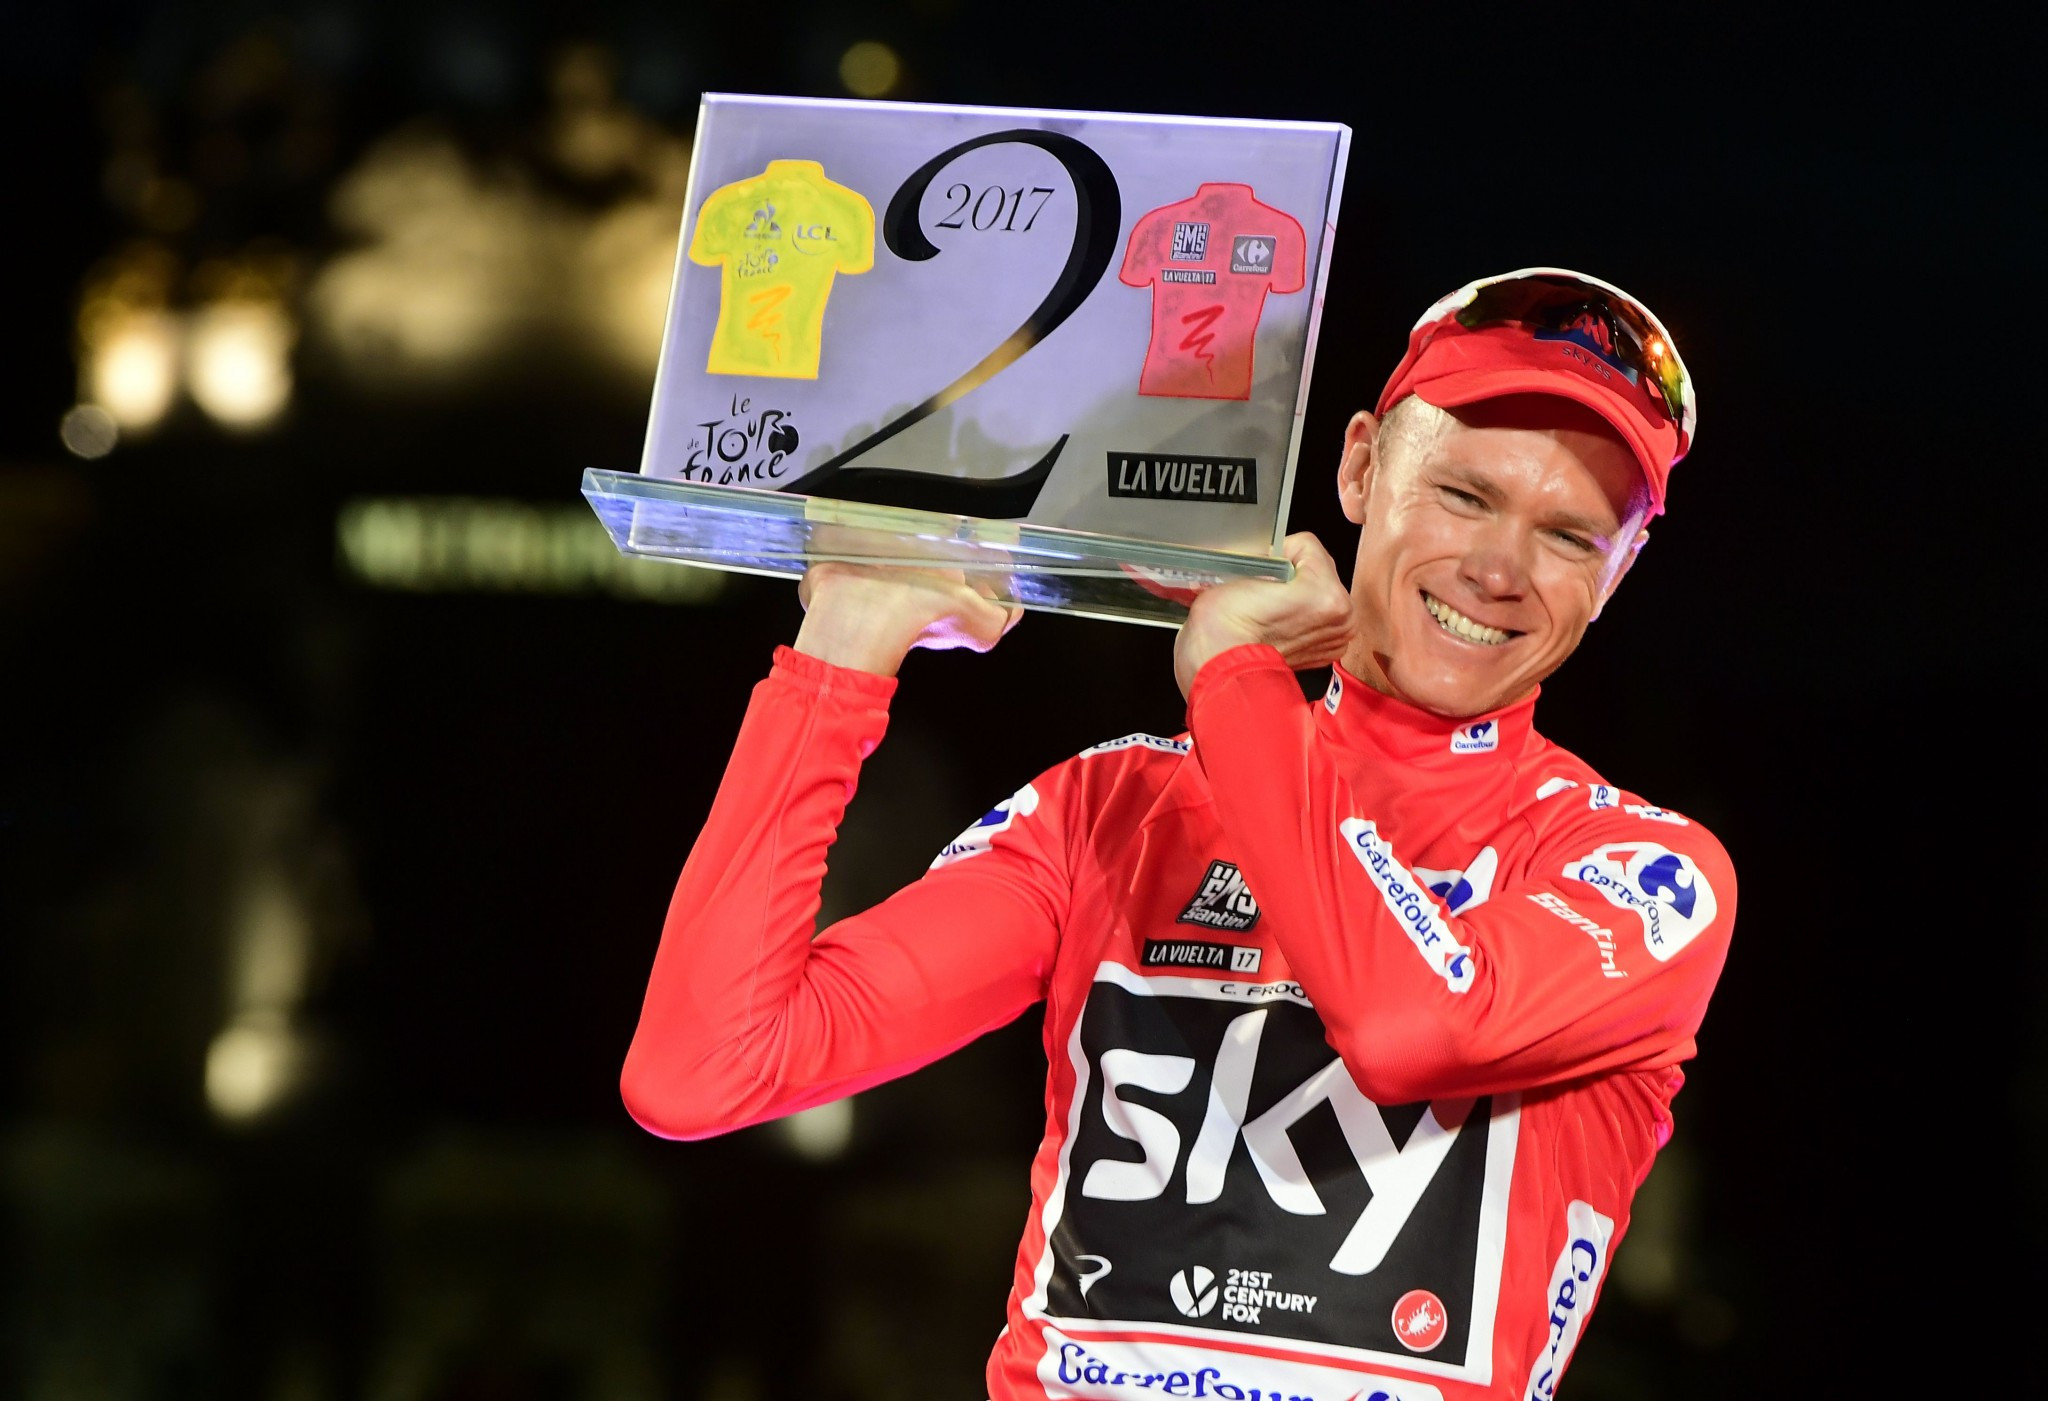 Chris Froome became the third rider to achieve the Tour de France and Vuelta a Espana double ©Getty Images